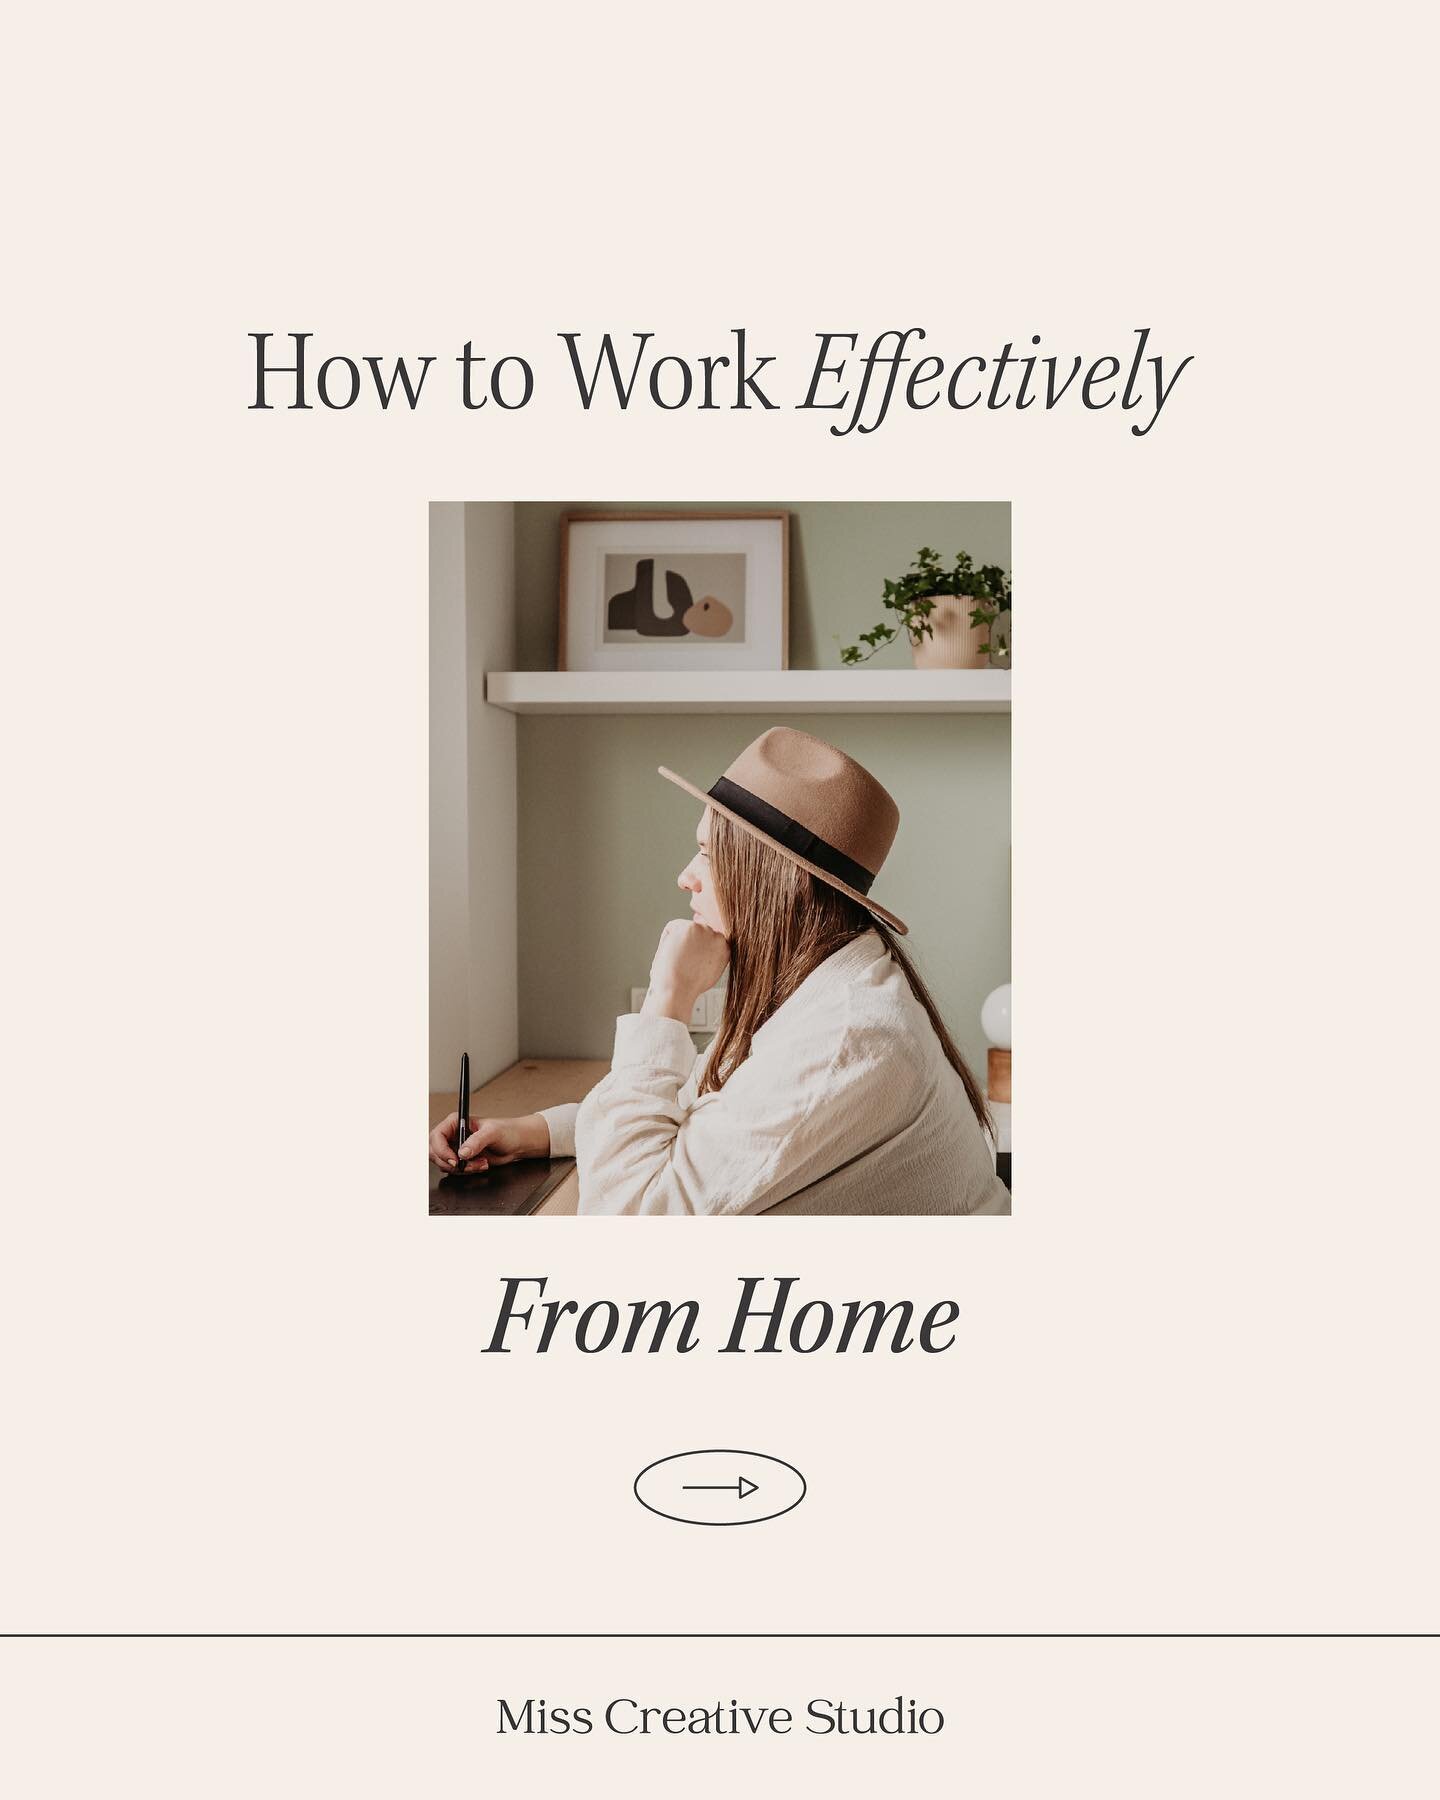 When I started my business in I felt I was one of the few people working from home but after COVID, this number has increased significantly.

In the beginning was hard, especially because I felt alone and it was hard to stay focused, but after all th